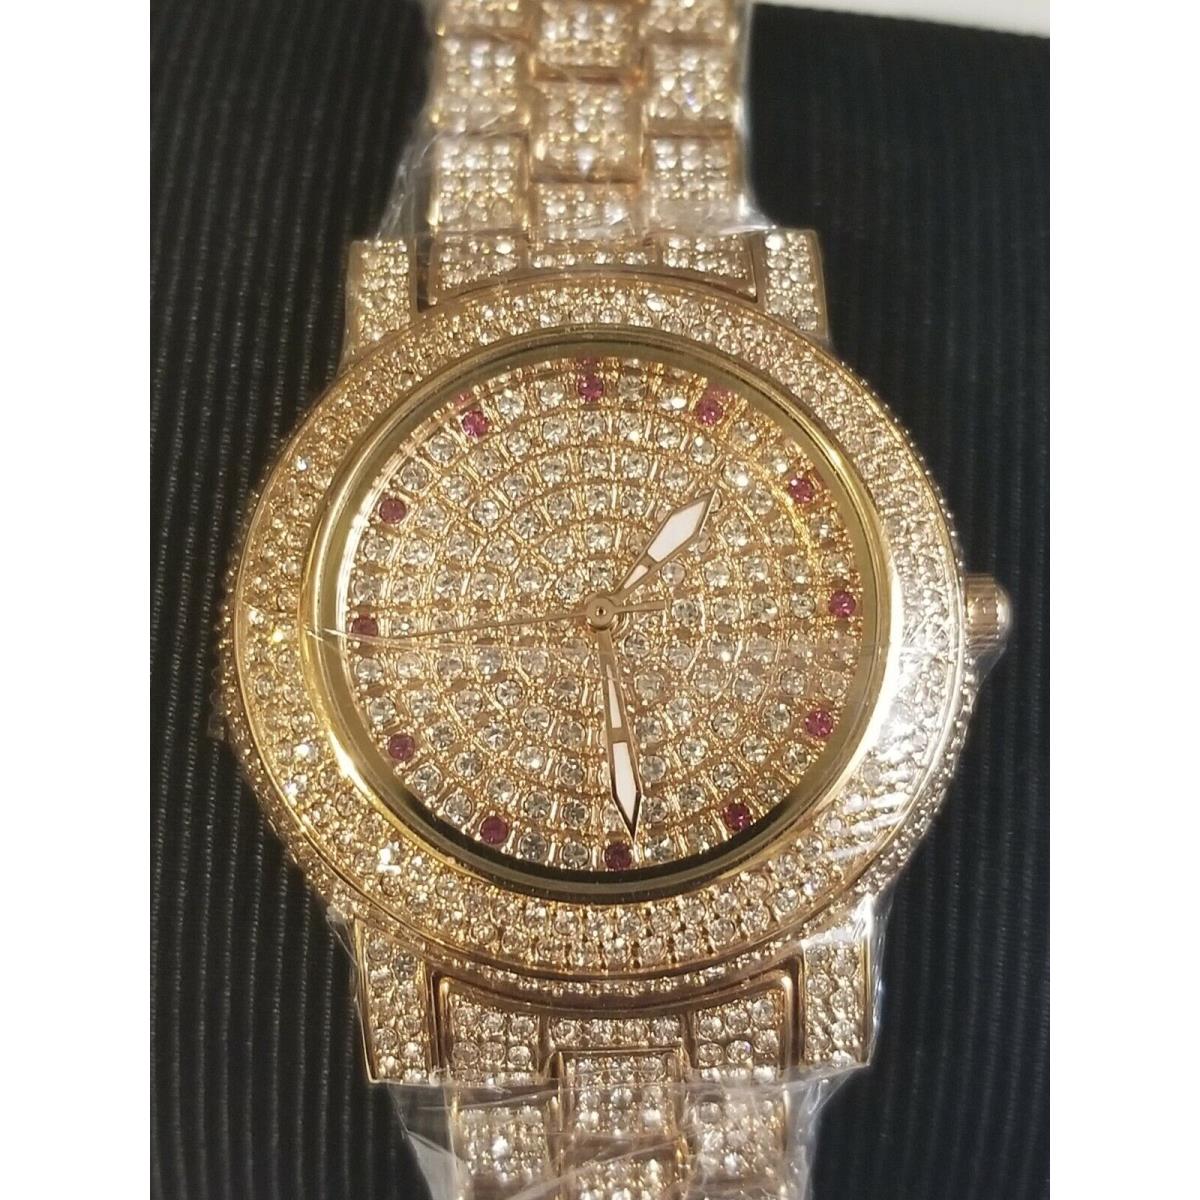 Bedazzled Adee Kaye Watch with 968 Pcs of Austrian Stone 3 Hand Dial AK2009LRG